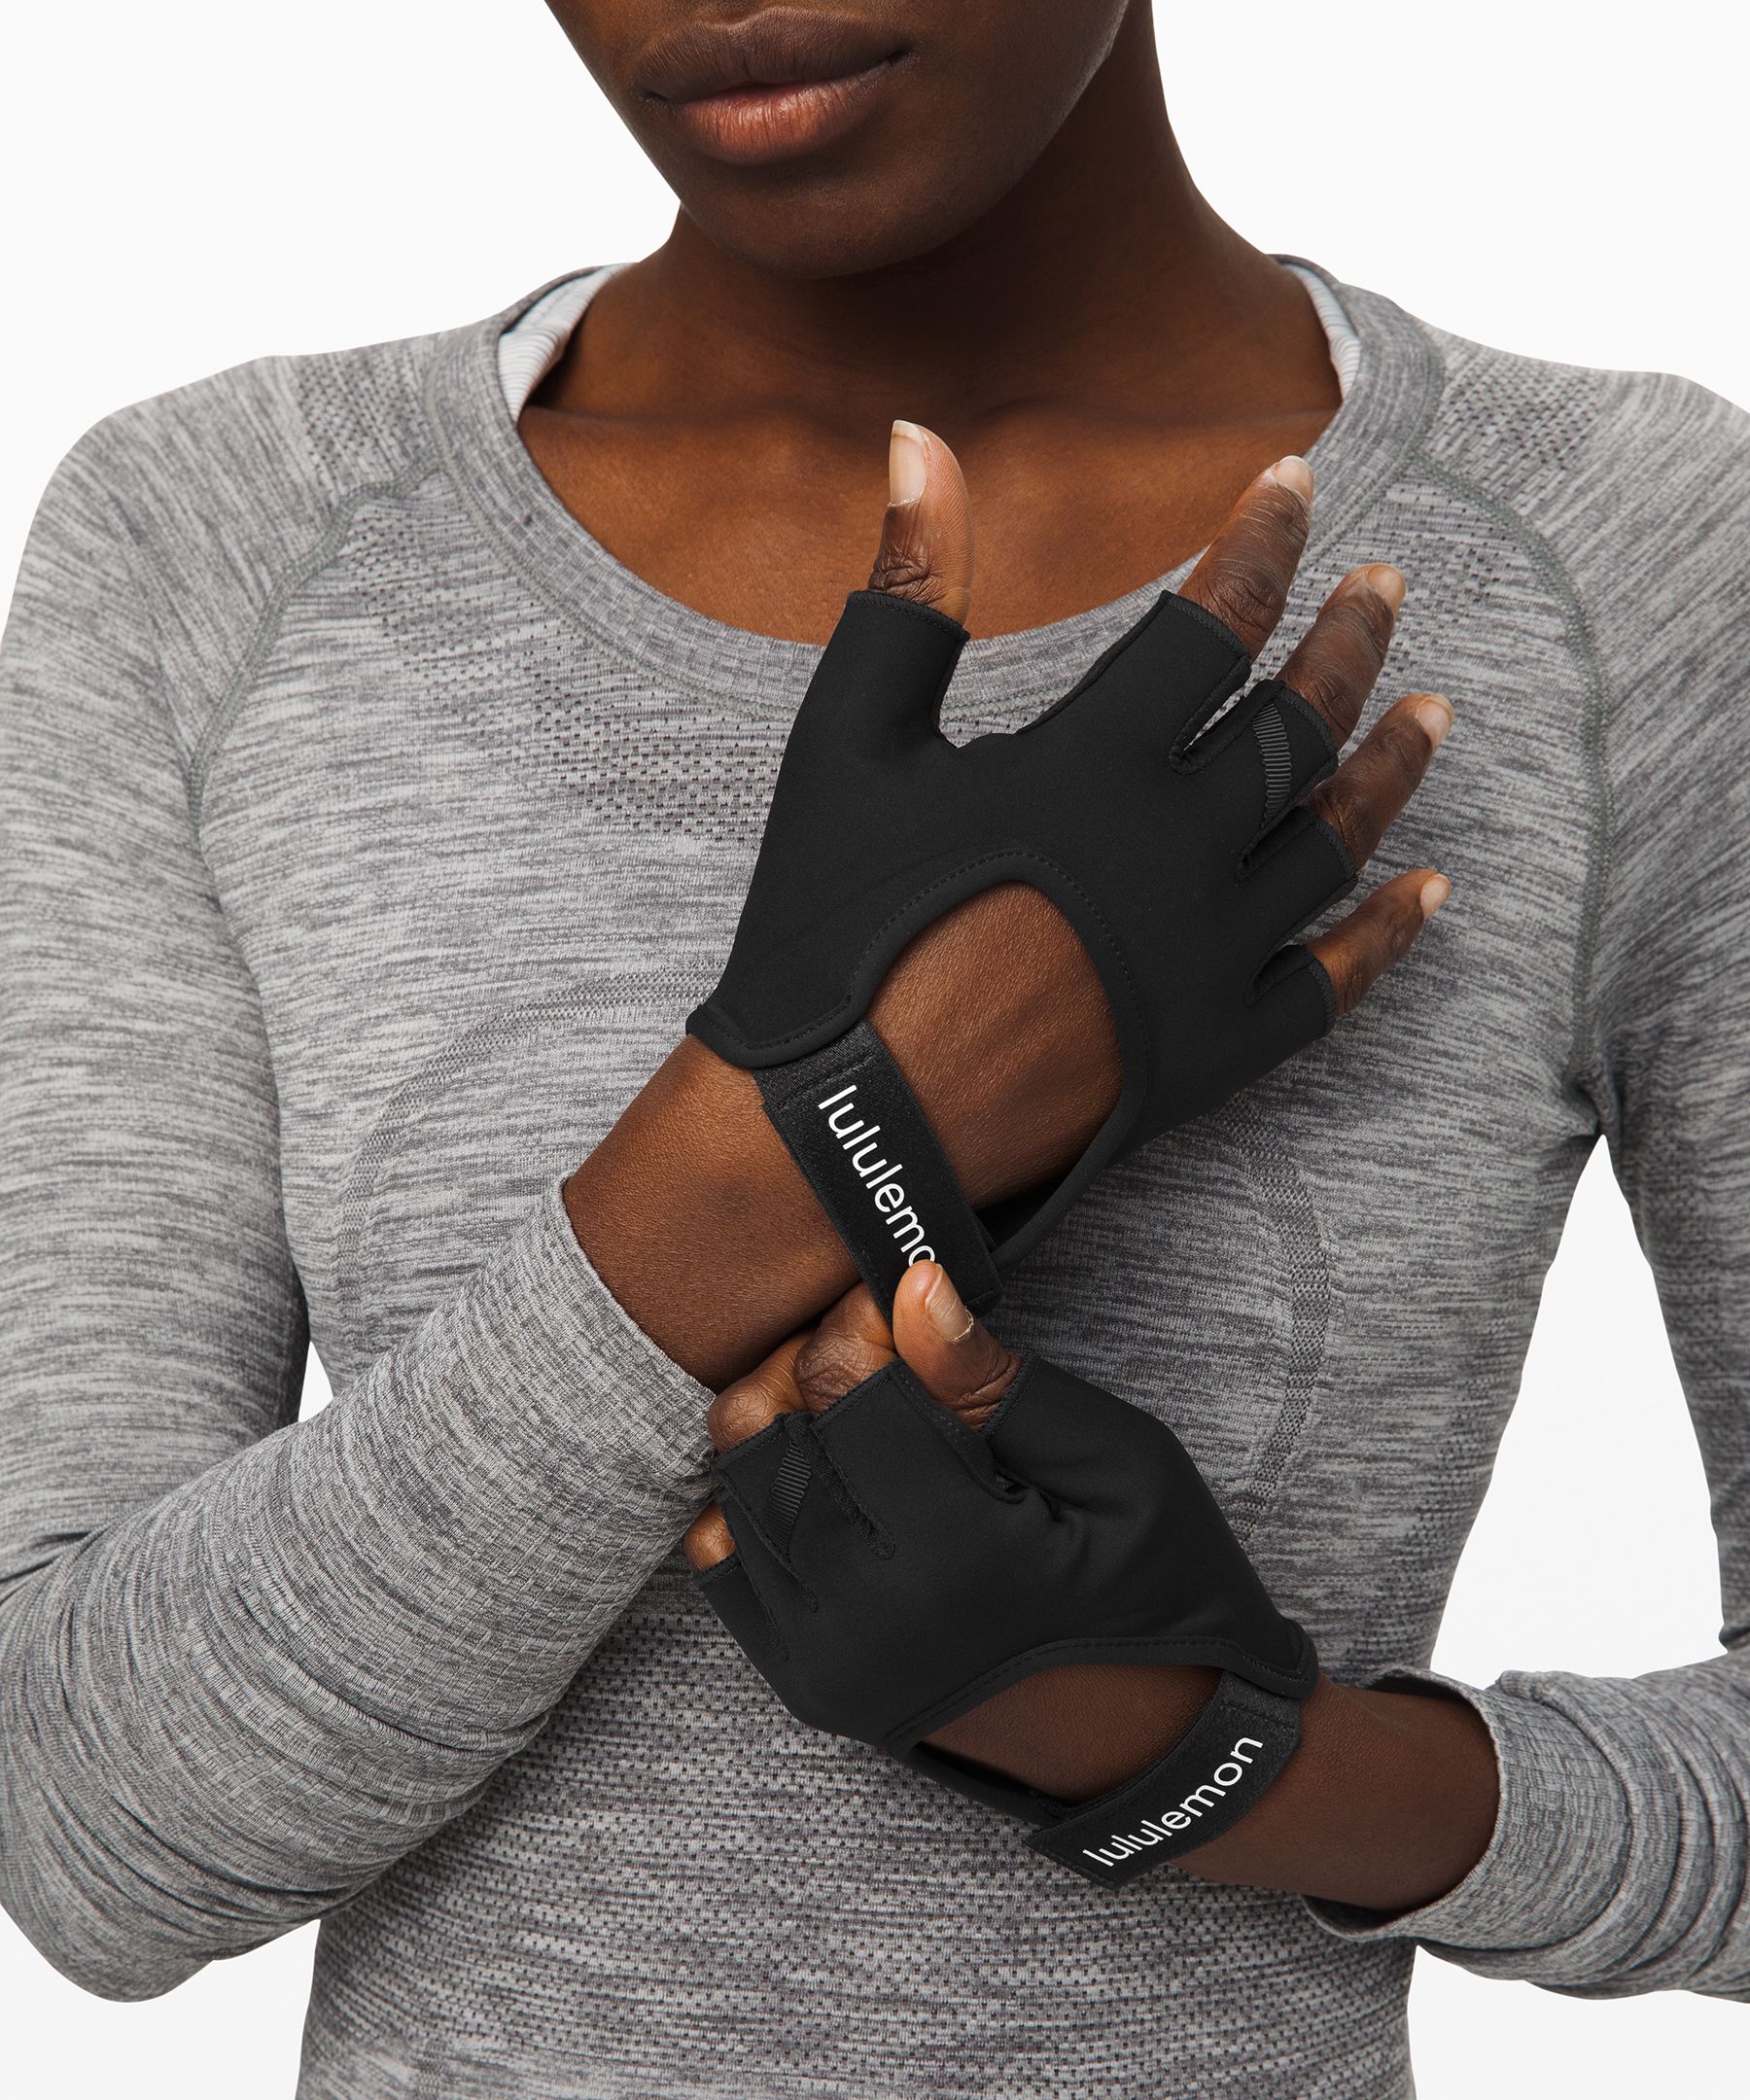 Uplift Training Gloves, Gloves and Mittens